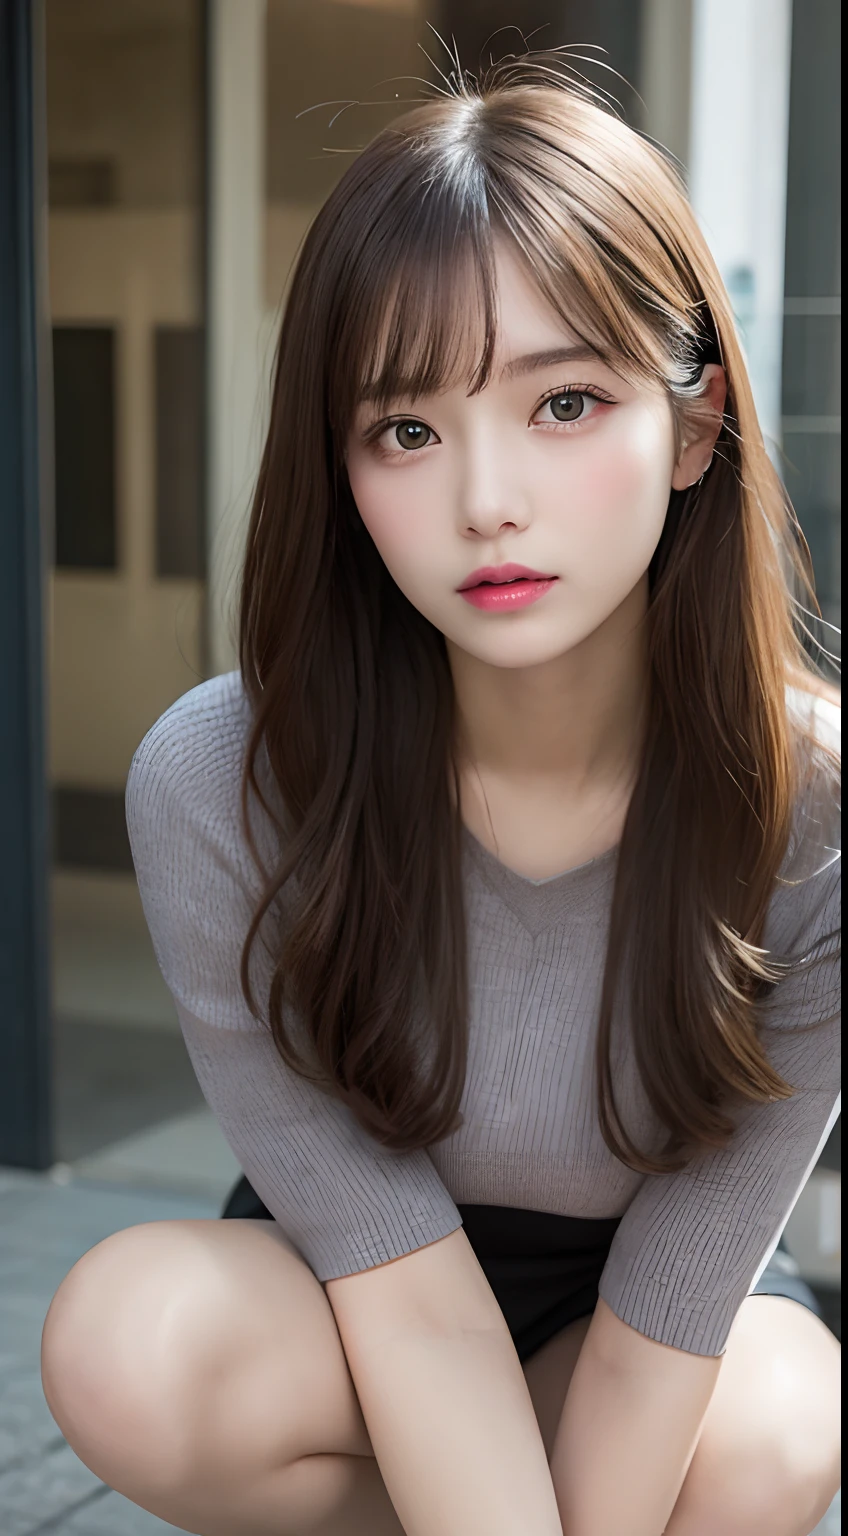 finely detail, hight resolution, hightquality、Perfect dynamic composition, Beautiful detailed eyes, Medium Hair, Colossal  、Natural Color Lip, Squatting,Kamimei、Shibuya、college aged、1人、Transparent skin、Glowing hair